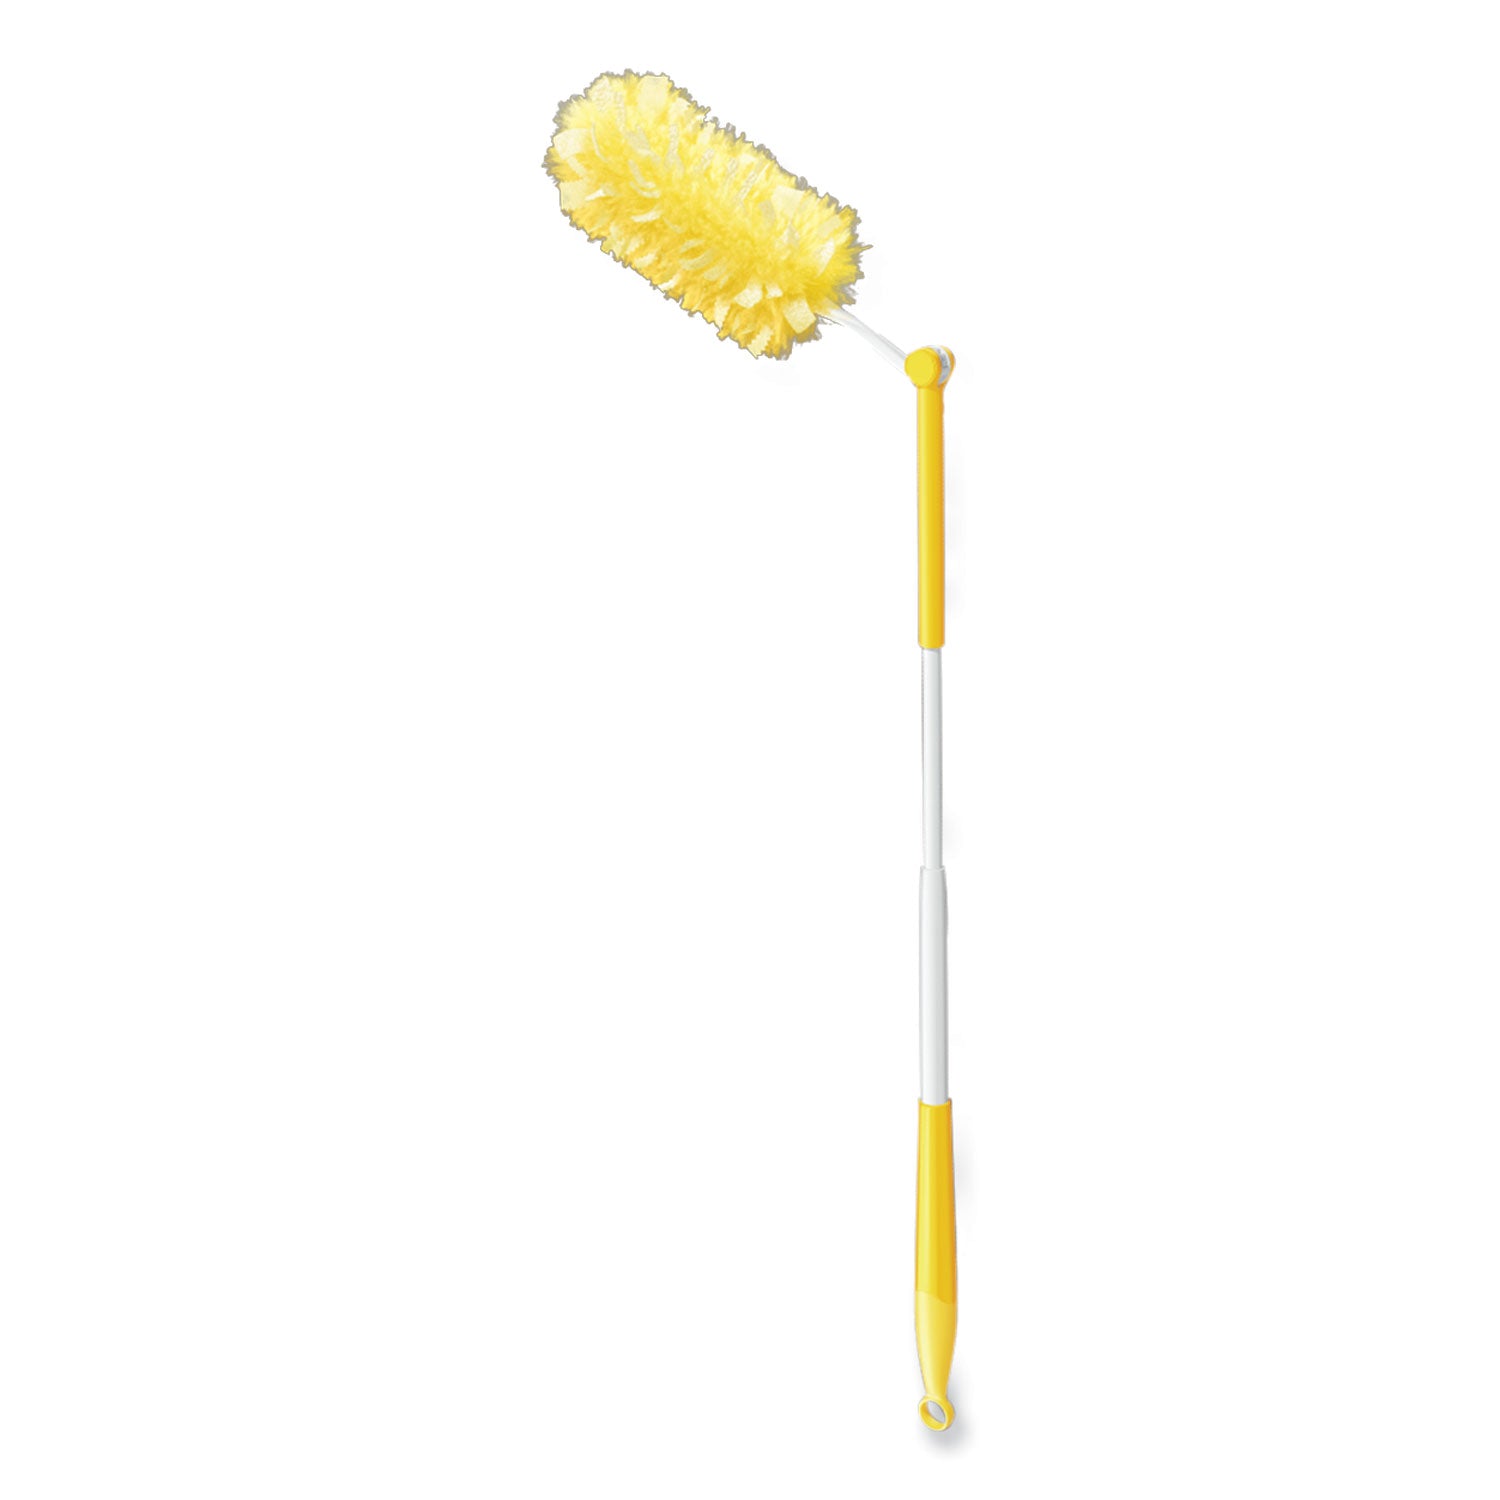 Heavy Duty Dusters with Extendable Handle, Plastic Handle Extends to 3 ft, 1 Handle and 3 Dusters/Kit, 6 Kits/Carton - 